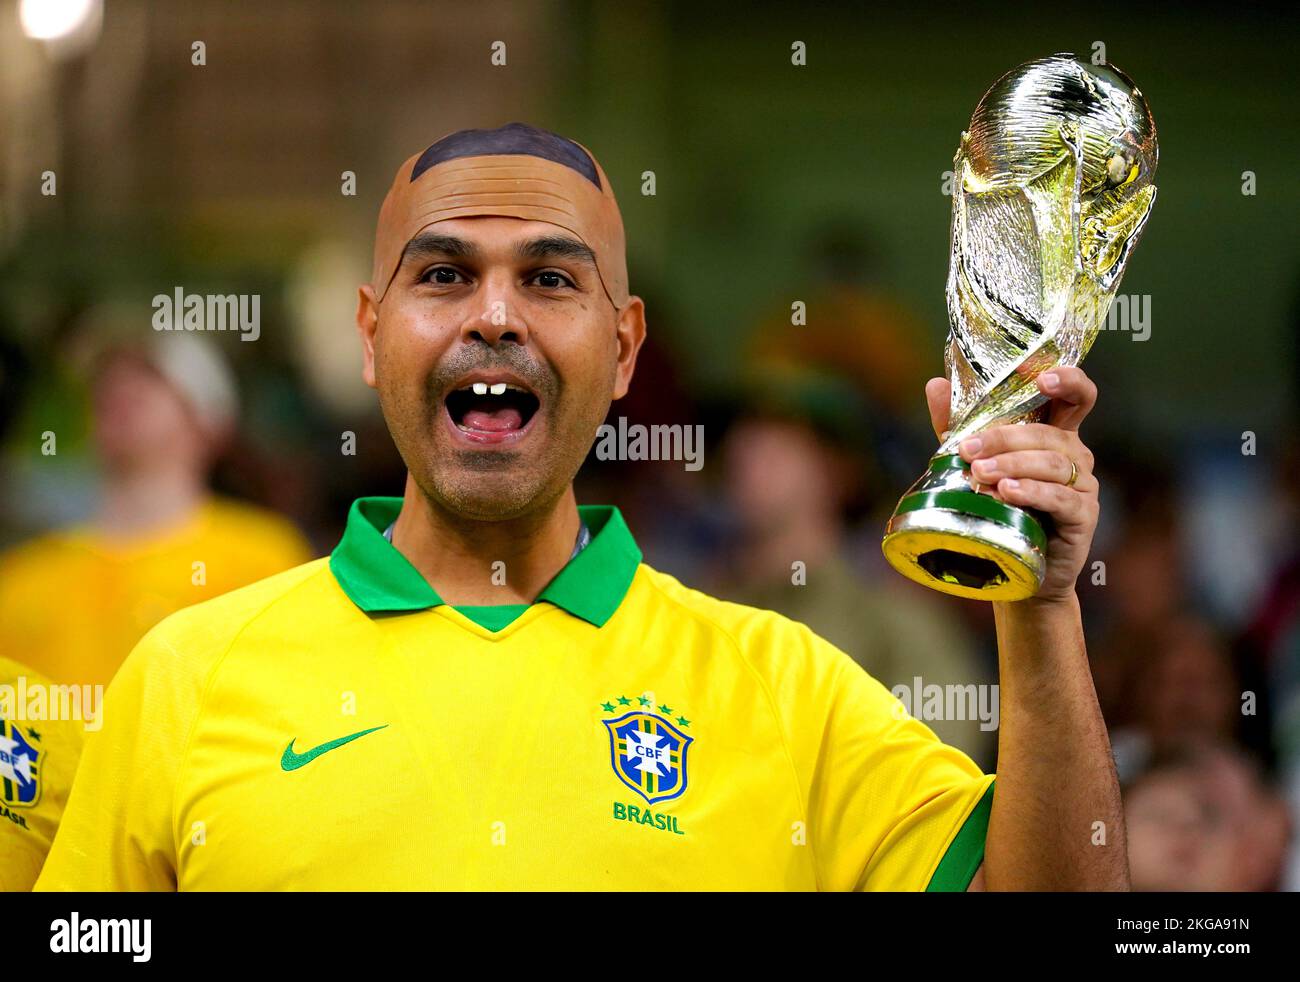 A Brazil fan dressed as former Brazil footballer Ronaldo, holds up a replica of the FIFA World Cup trophy ahead of the FIFA World Cup Group D match at Al Janoub Stadium, Al Wakrah. Picture date: Tuesday November 22, 2022. Stock Photo